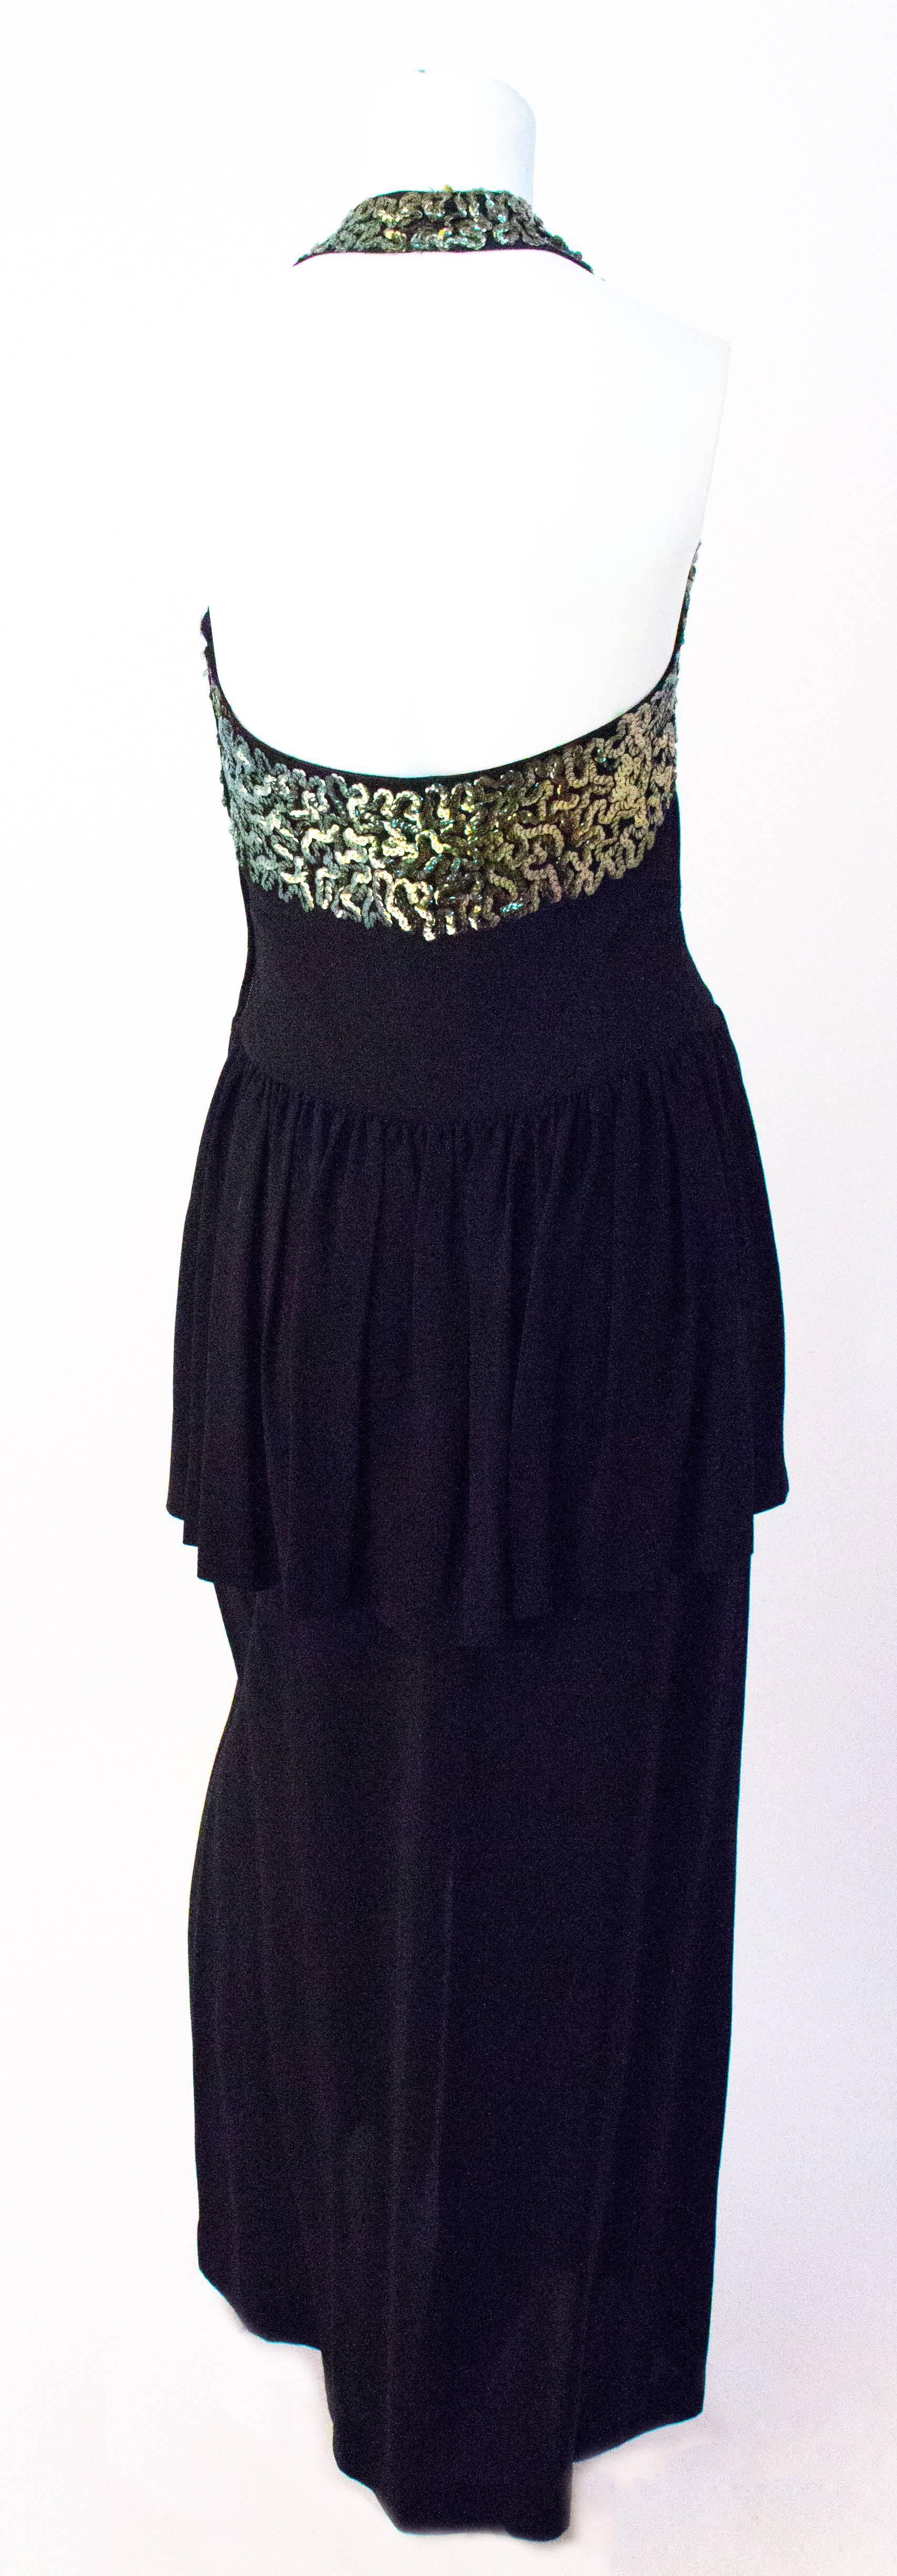 40s Black Crepe Halter Evening Gown with Green Sequined Embellishment on Bodice. Peplum. Metal zipper up the side. 

Front dancing slit: 13 1/2 inches
